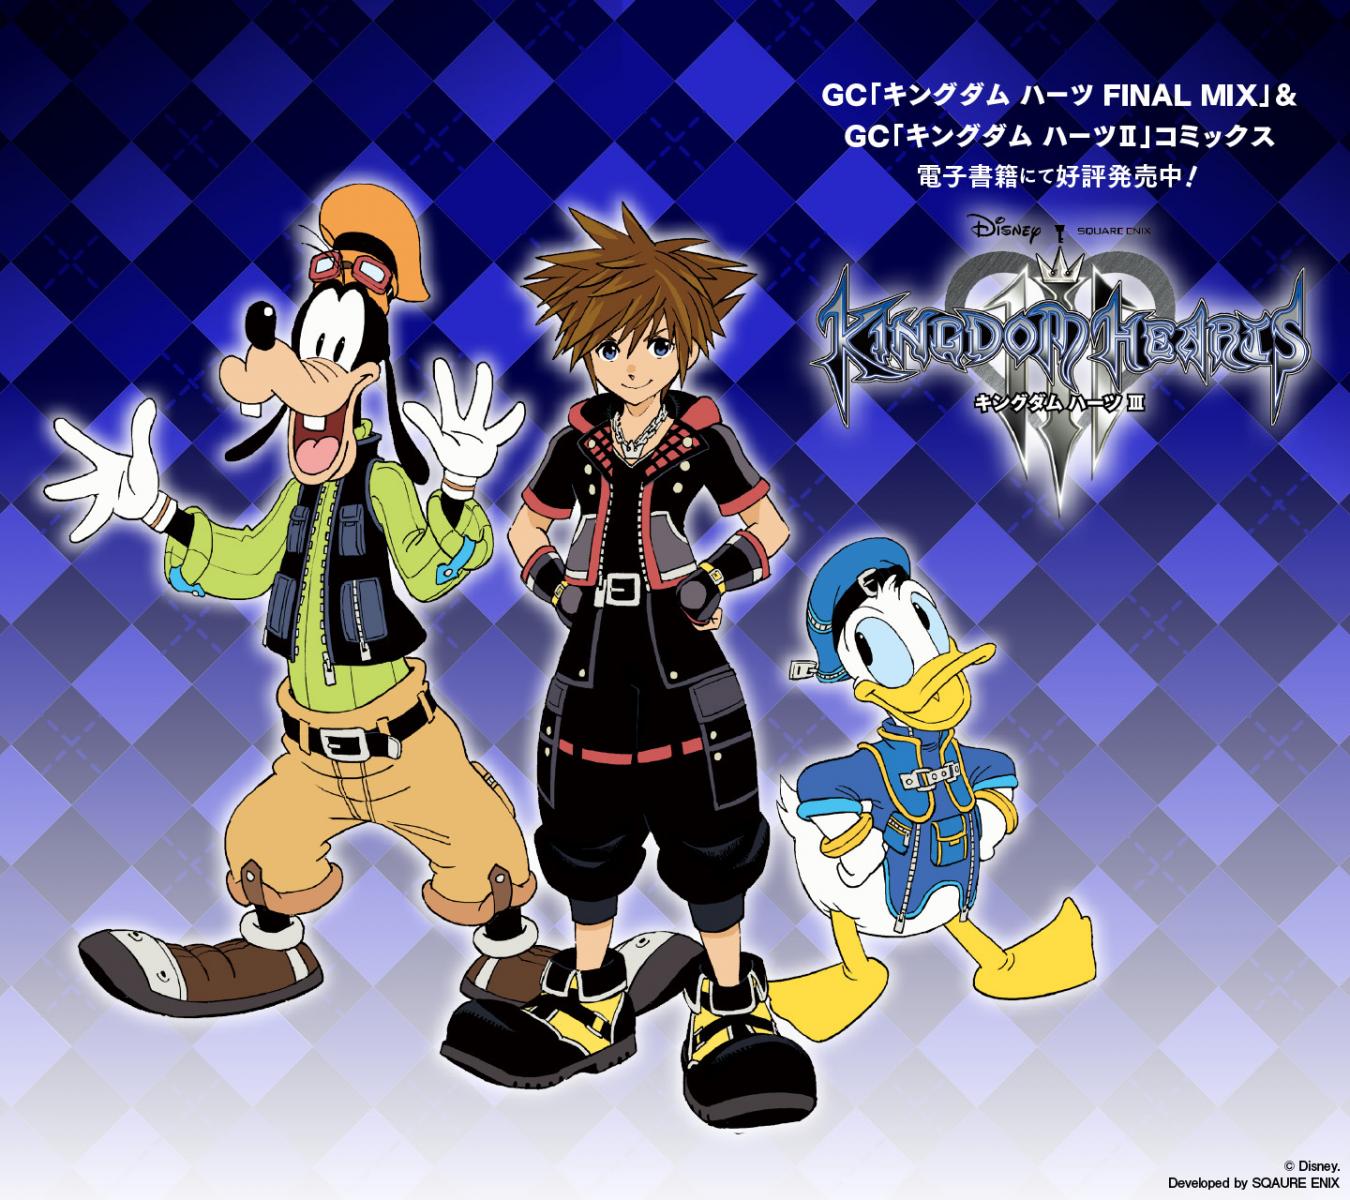 Special Kingdom Hearts Iii Wallpaper Featuring Artwork By Shiro Amano Is Now Available For Download On Square Enix Gangan Site Kingdom Hearts News Kh13 For Kingdom Hearts